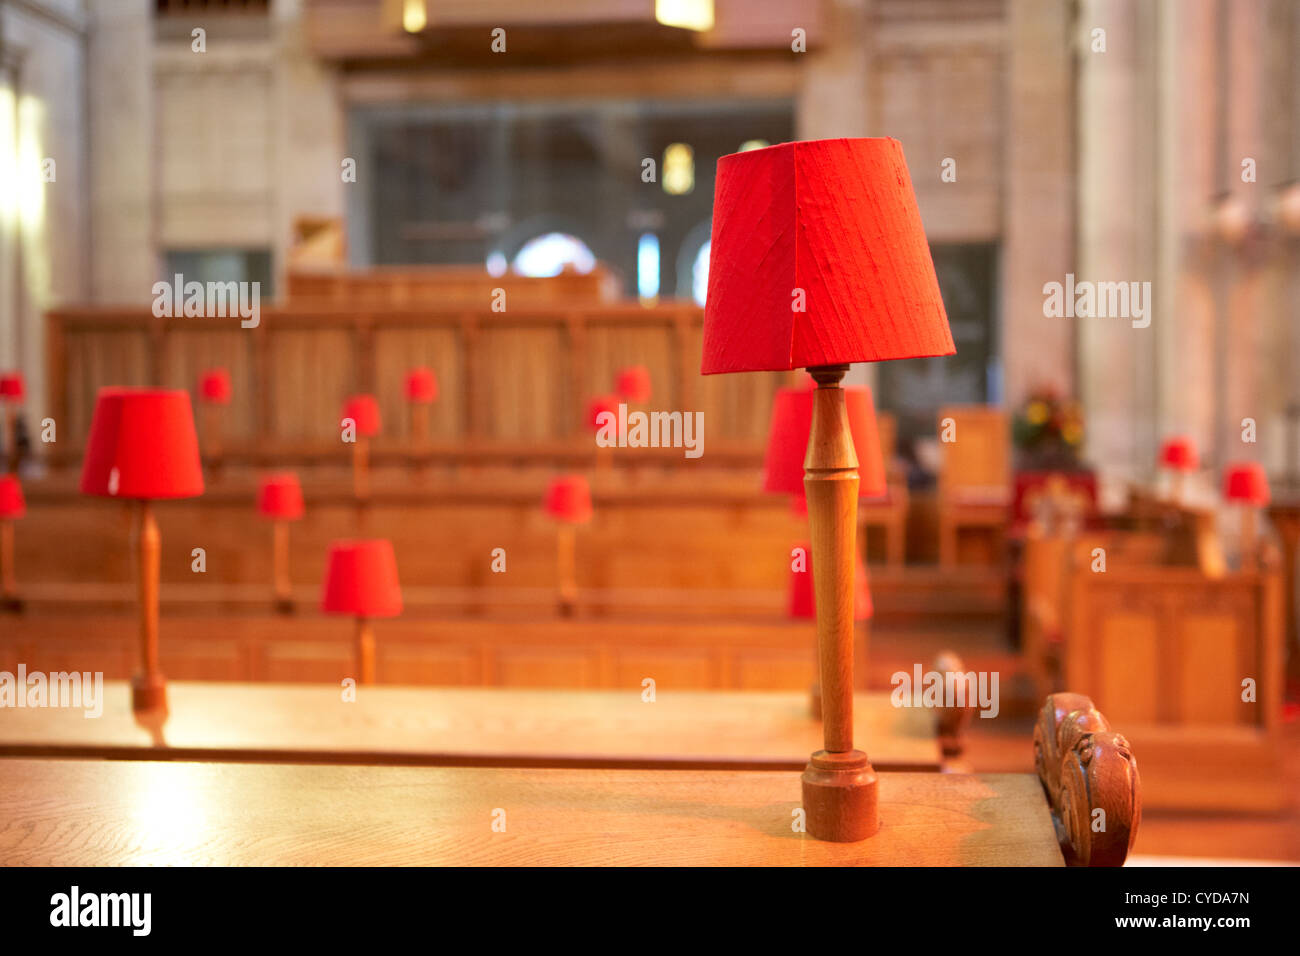 choir stalls with red lampshades st annes cathedral belfast northern ireland uk Stock Photo